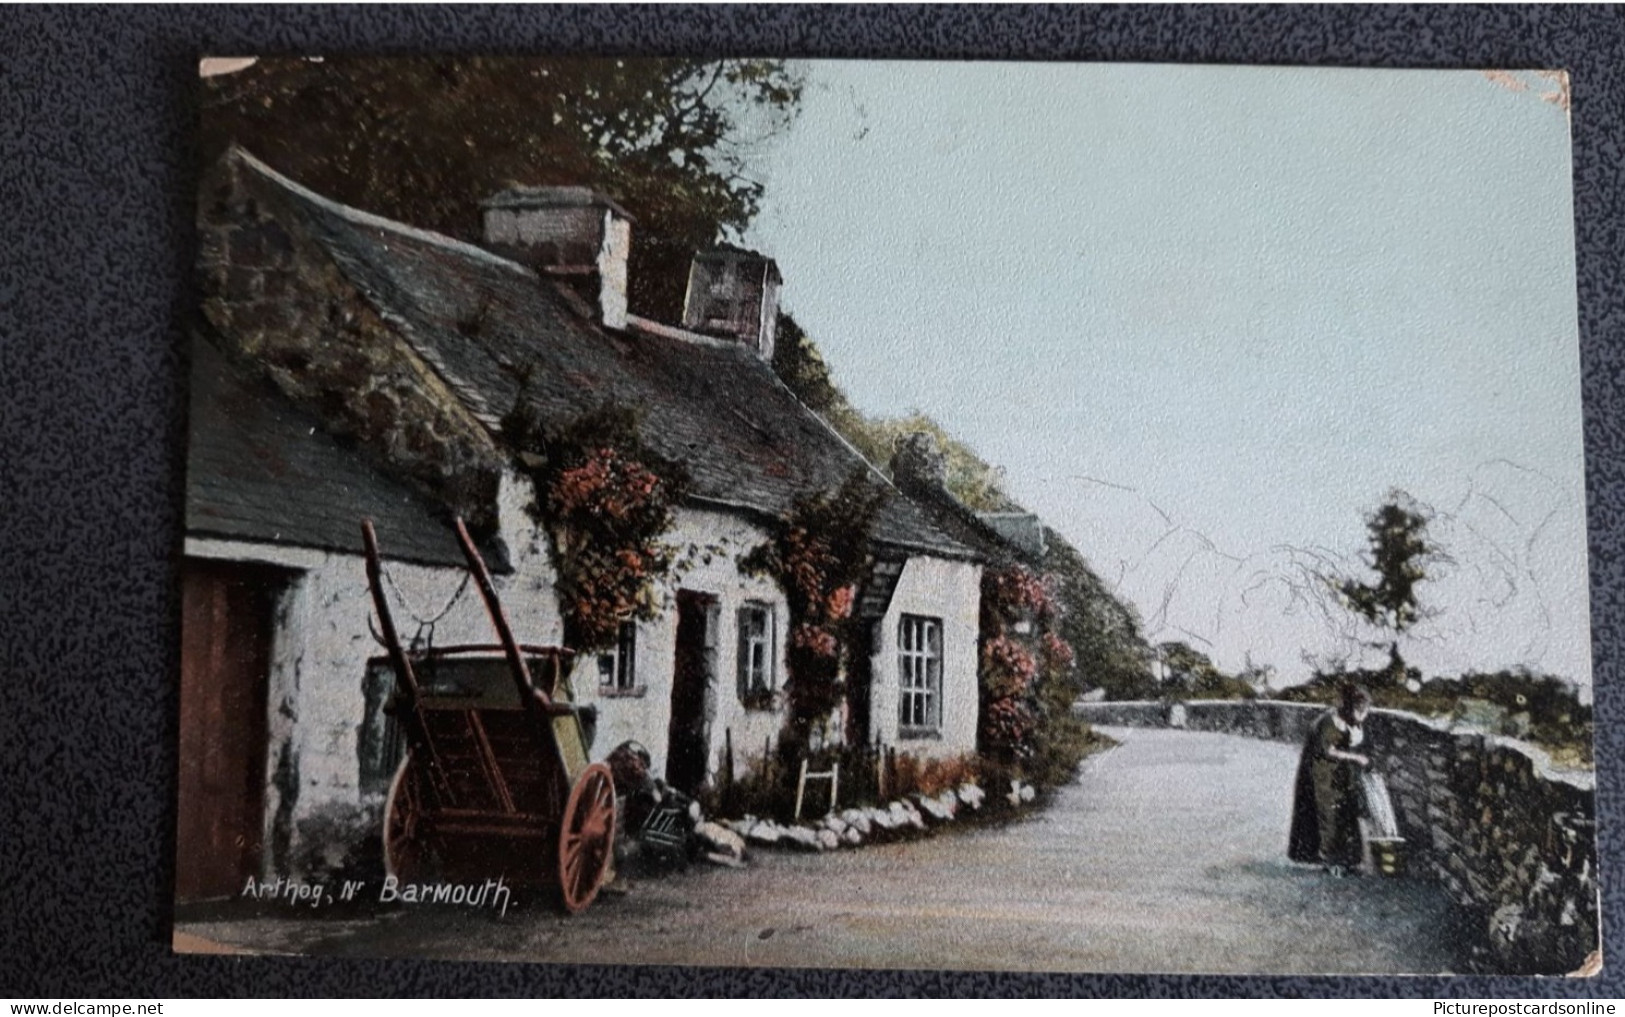 ARTHOG NEAR BARMOUTH OLD COLOUR POSTCARD WALES - Merionethshire